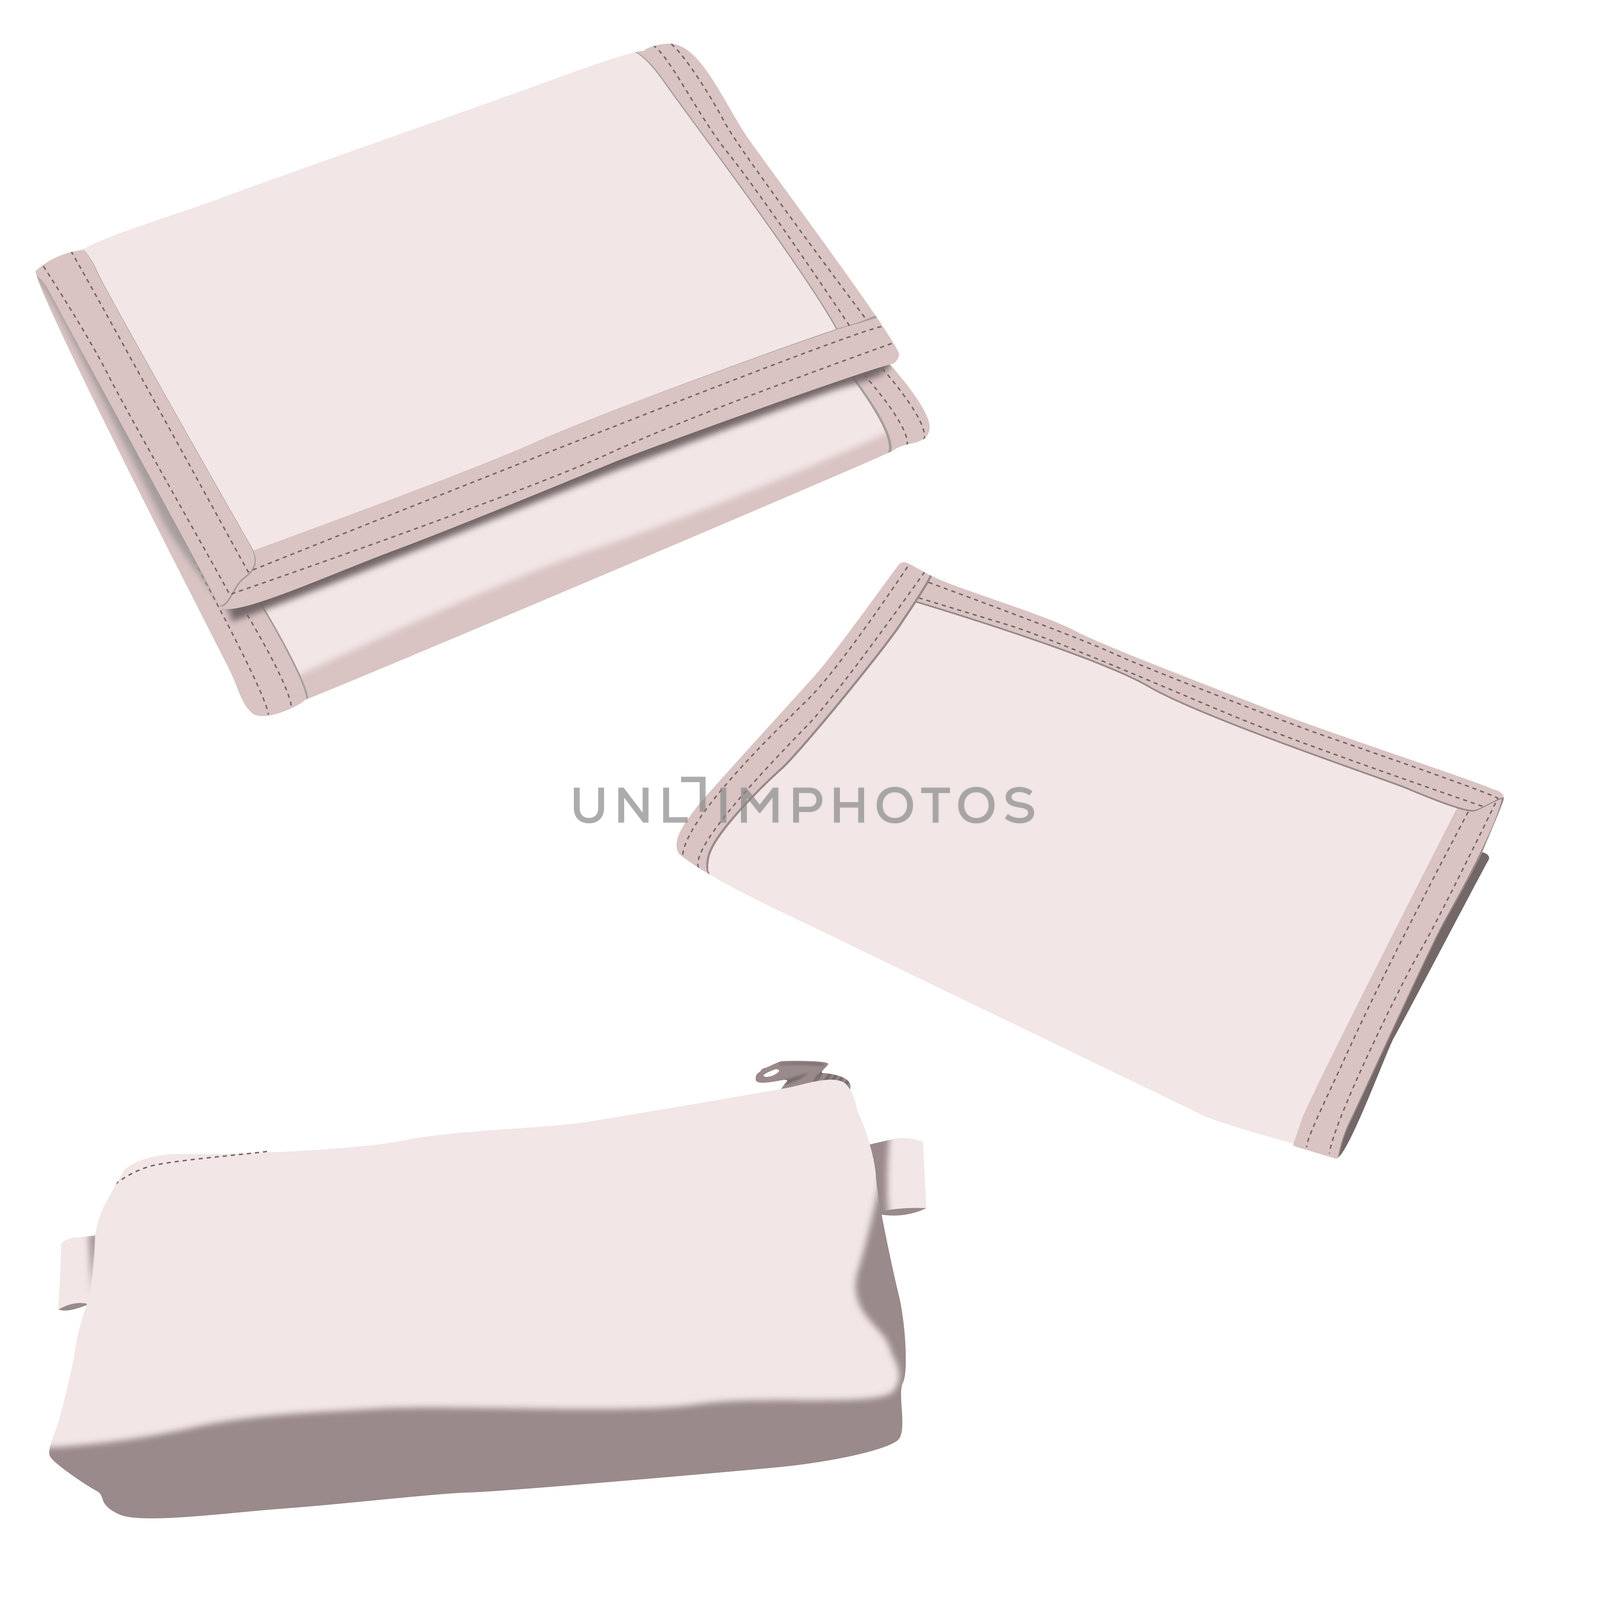 Wallets and Pencil Case Illustration